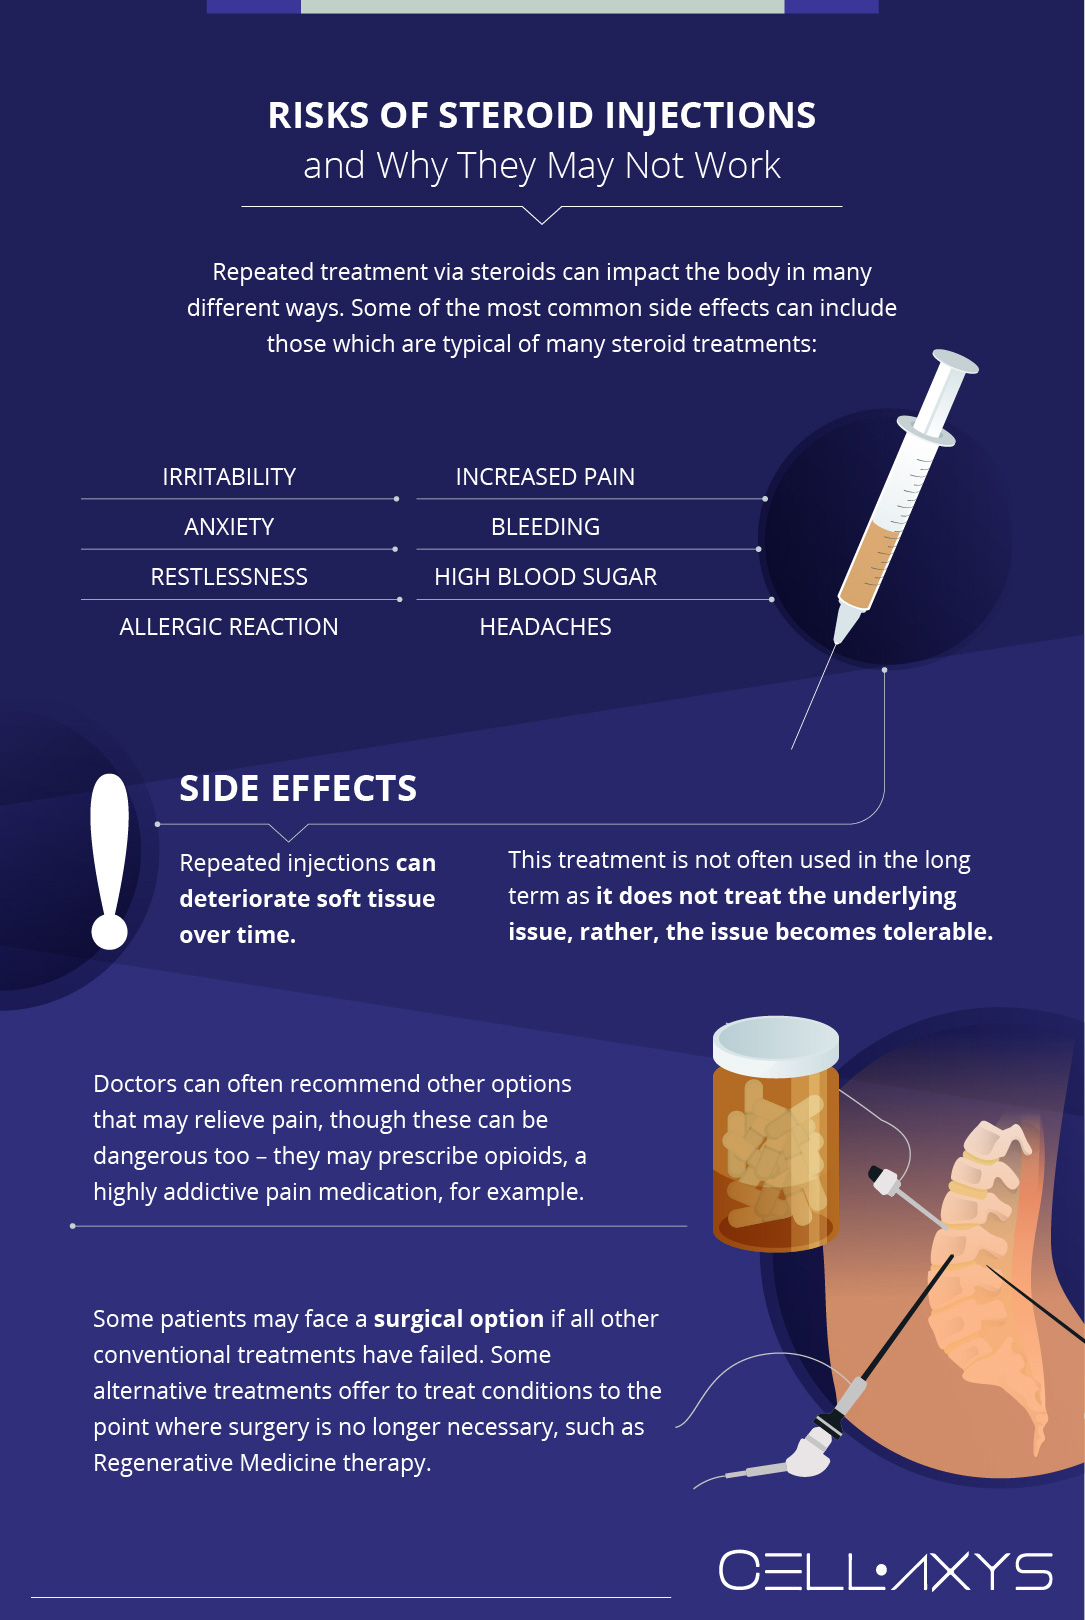 Risks of Steroid Injections and Why They May Not Work